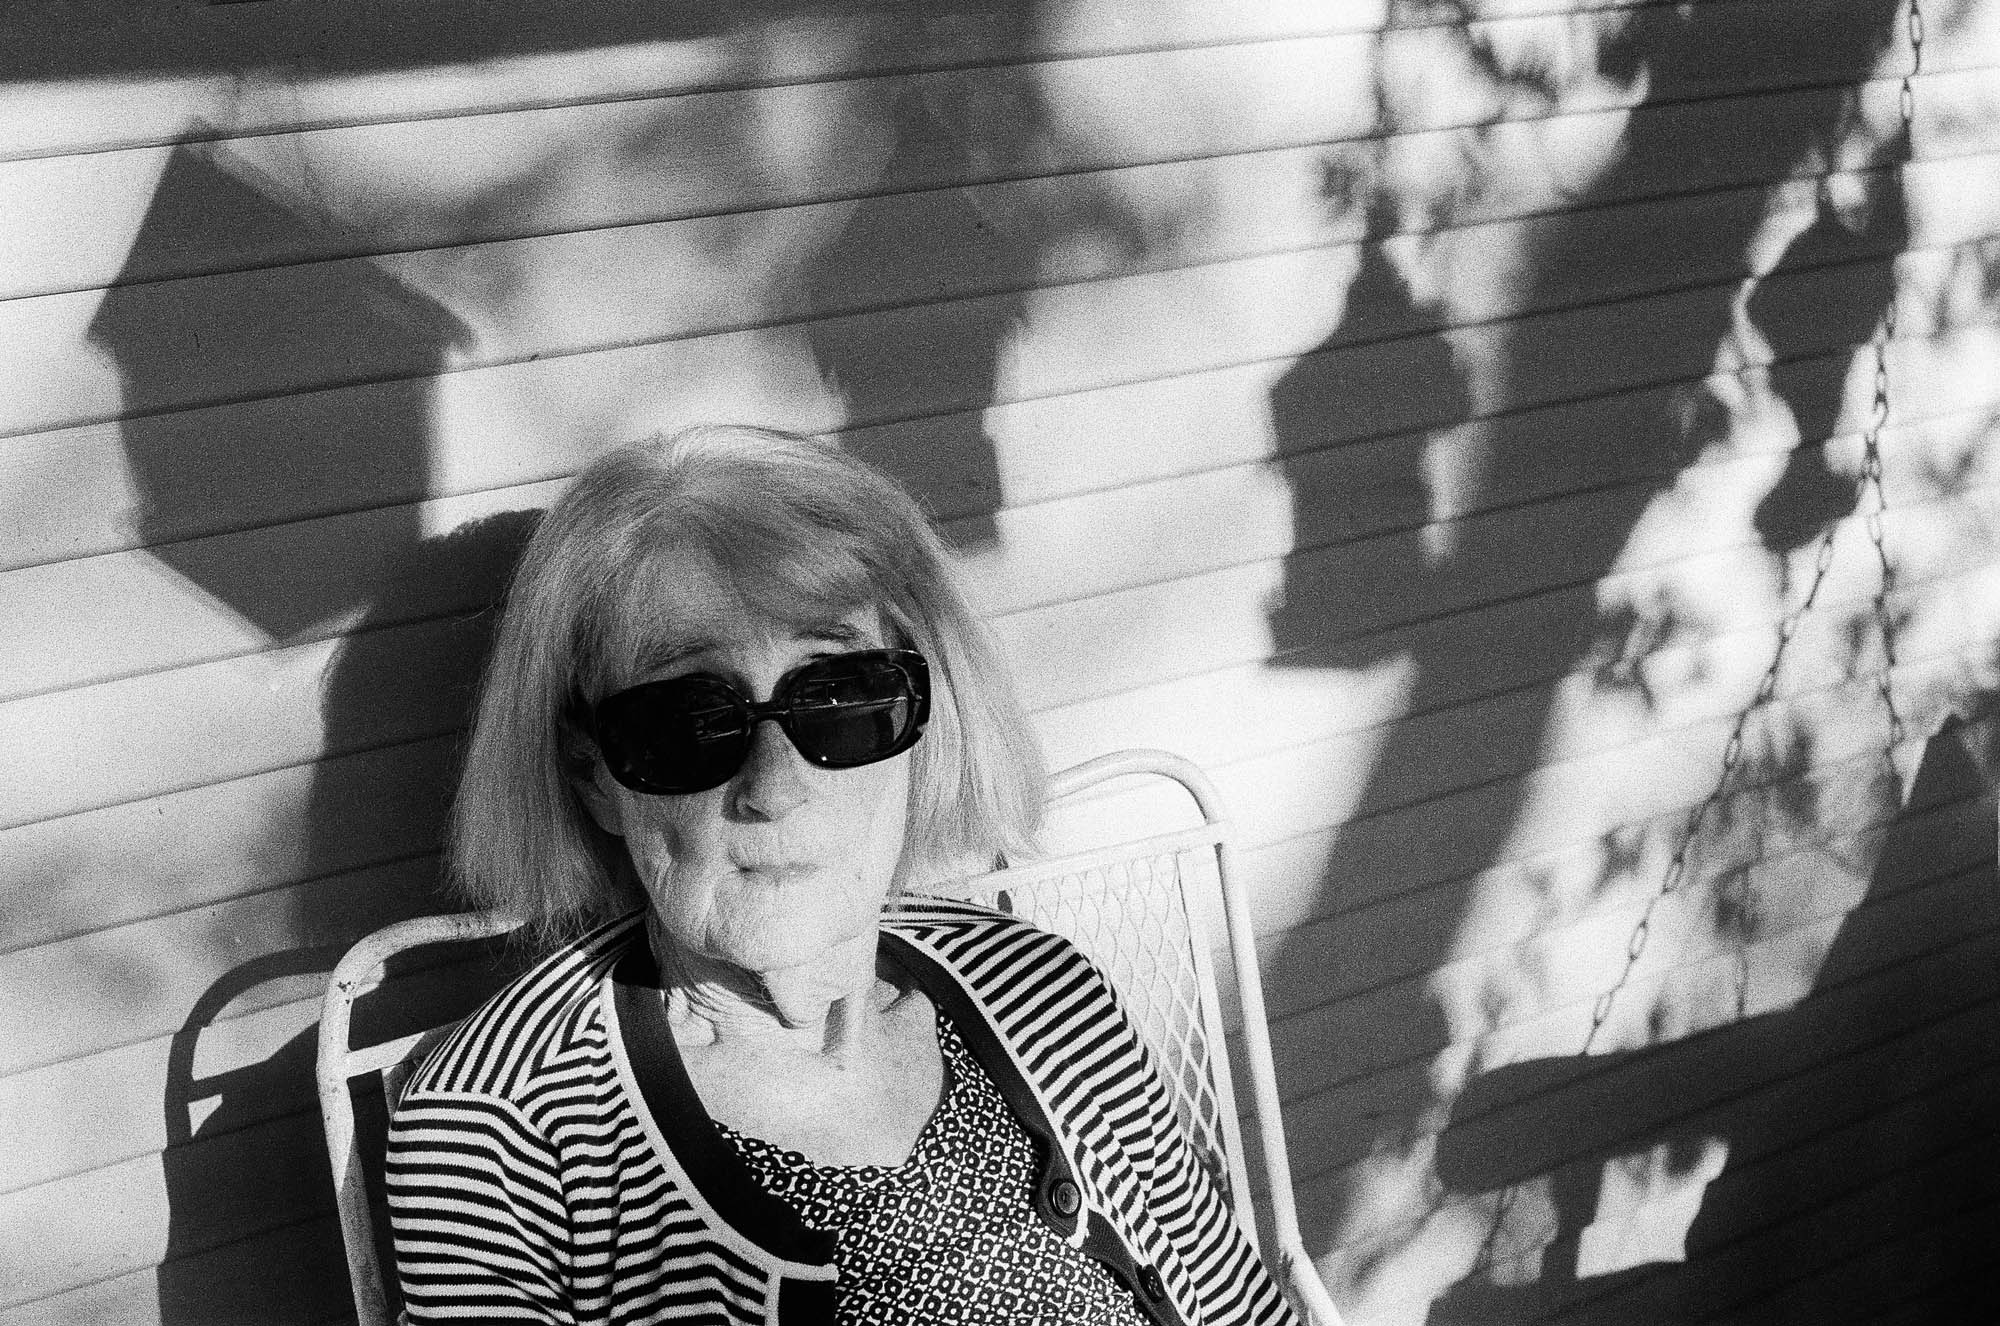 Grandmother on front porch at golden hour